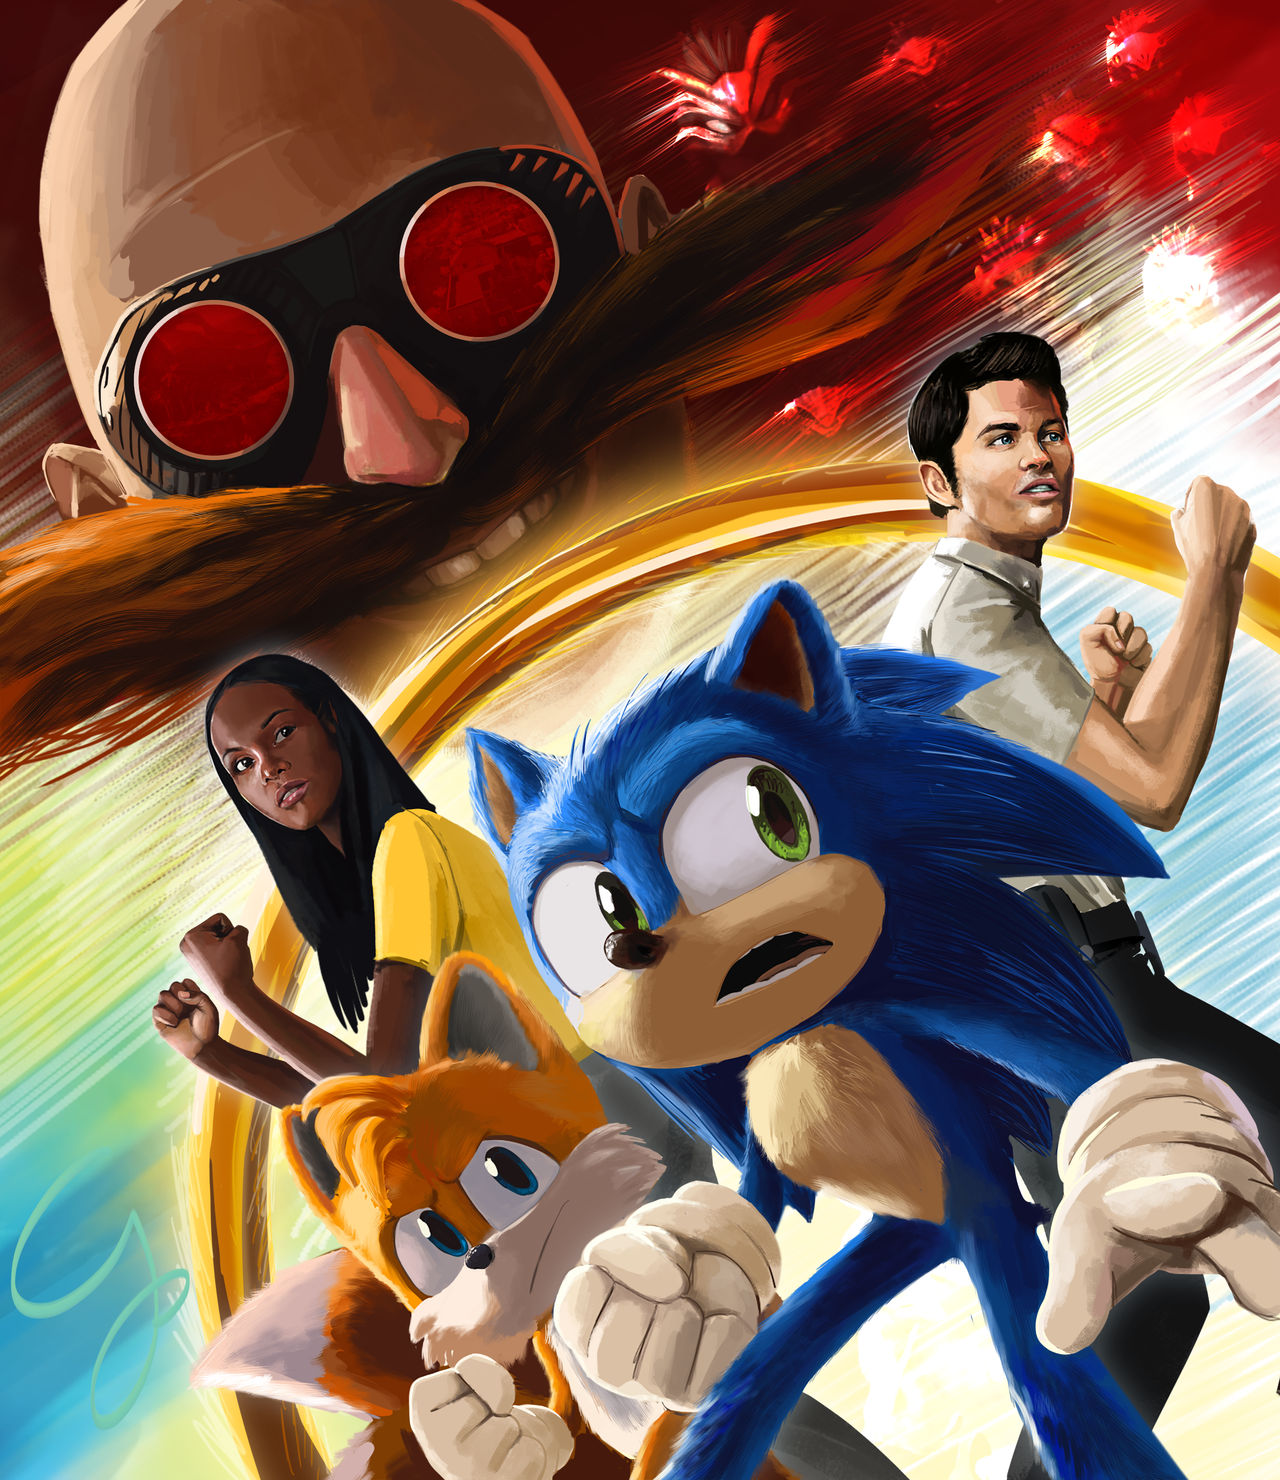 Sonic The Hedgehog 2 Movie Poster by JacobLewis1954 on DeviantArt